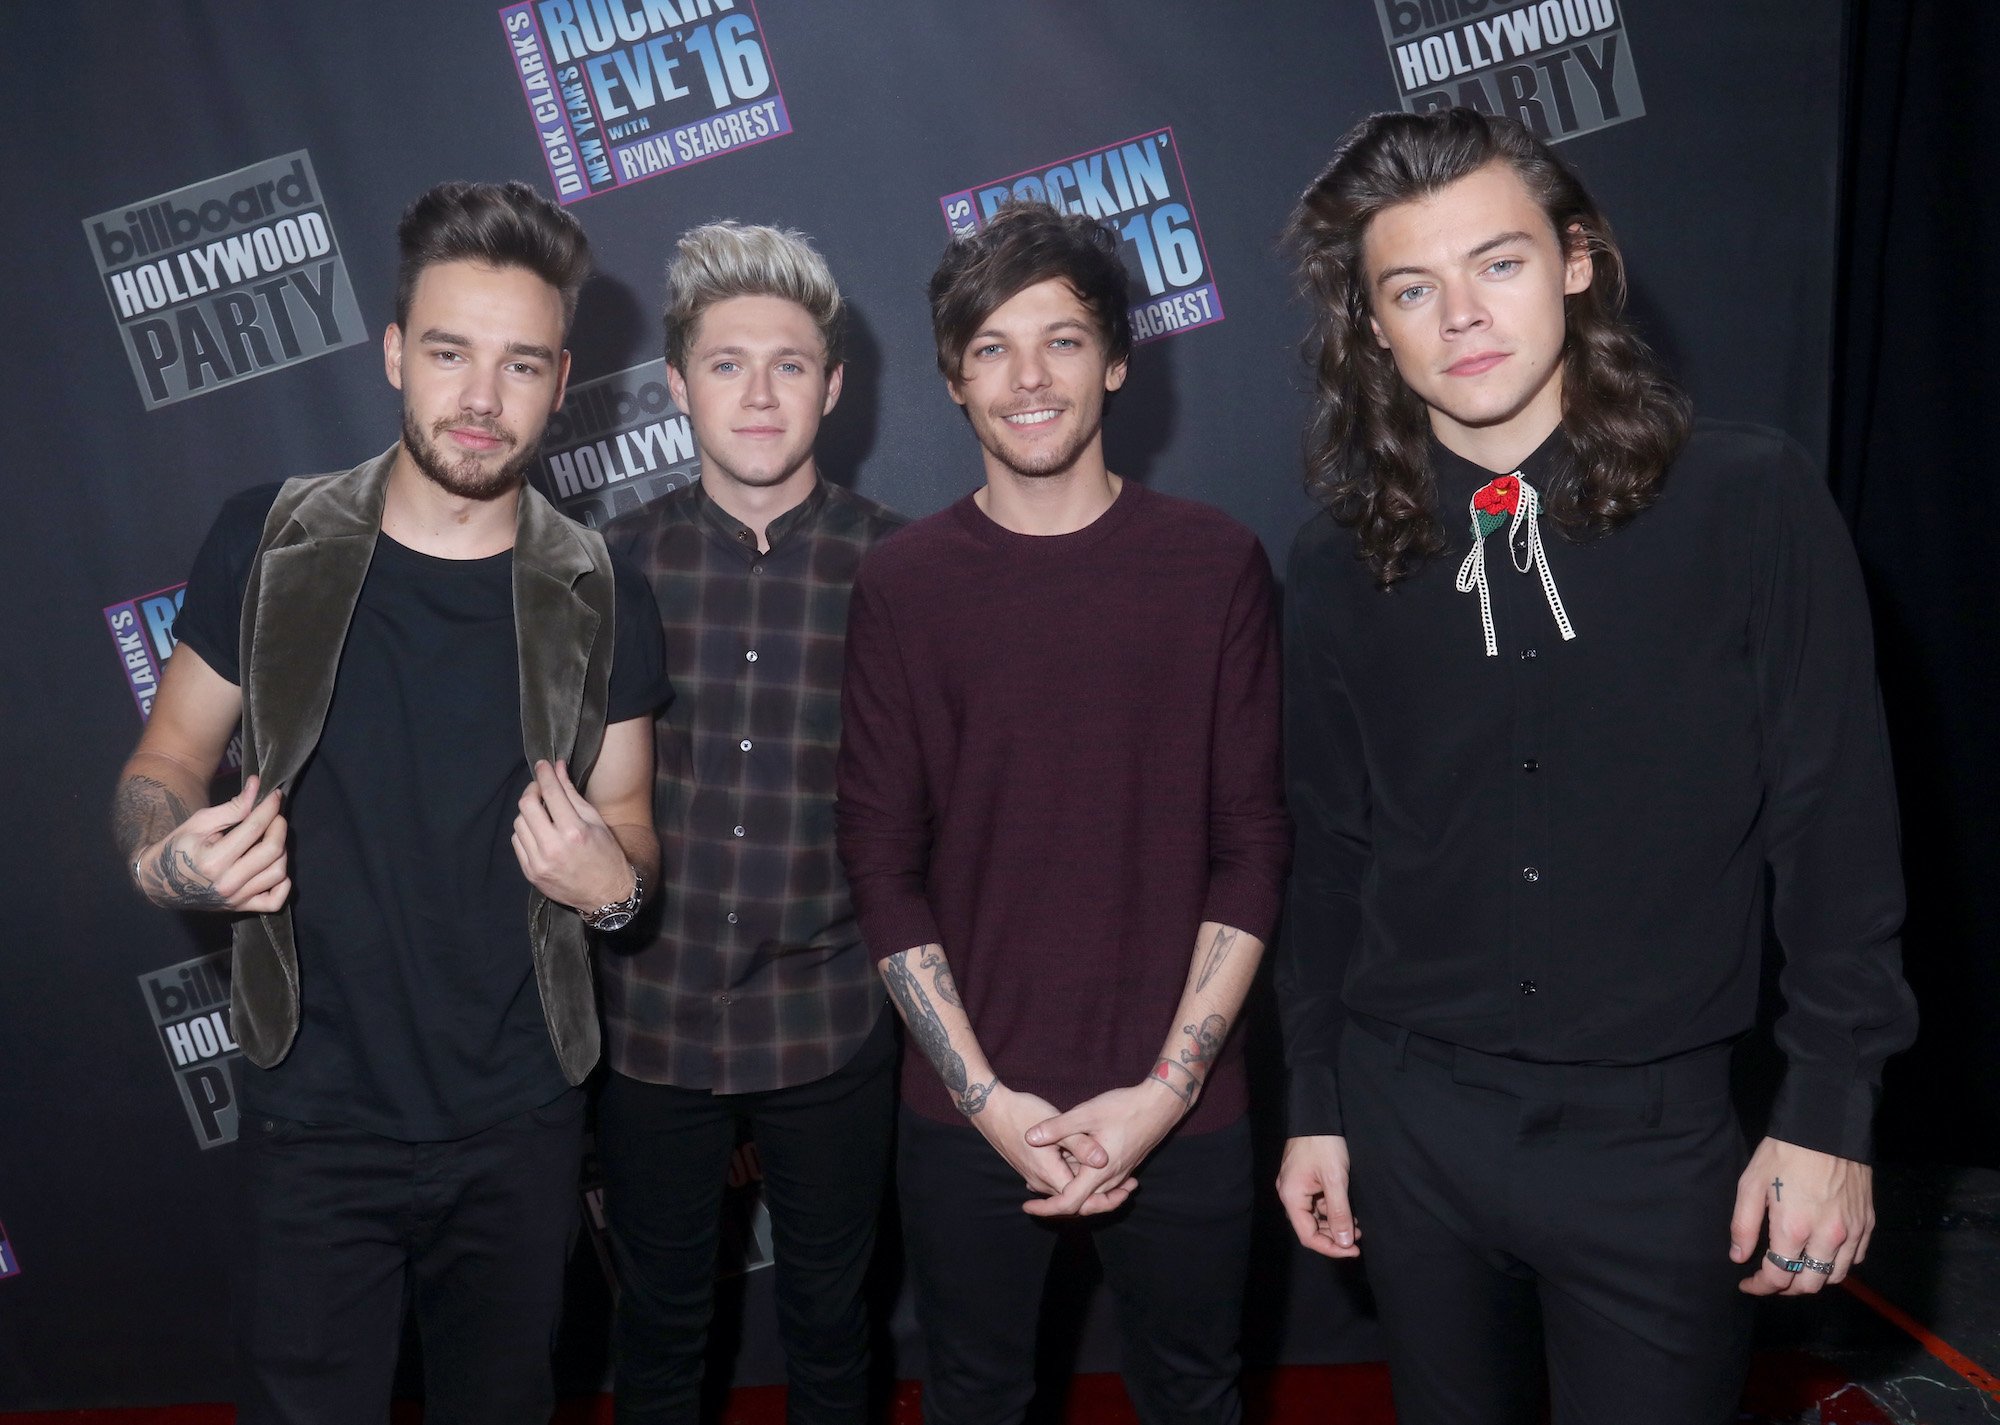 (L-R) Liam Payne, Niall Horan, Louis Tomlinson and Harry Styles